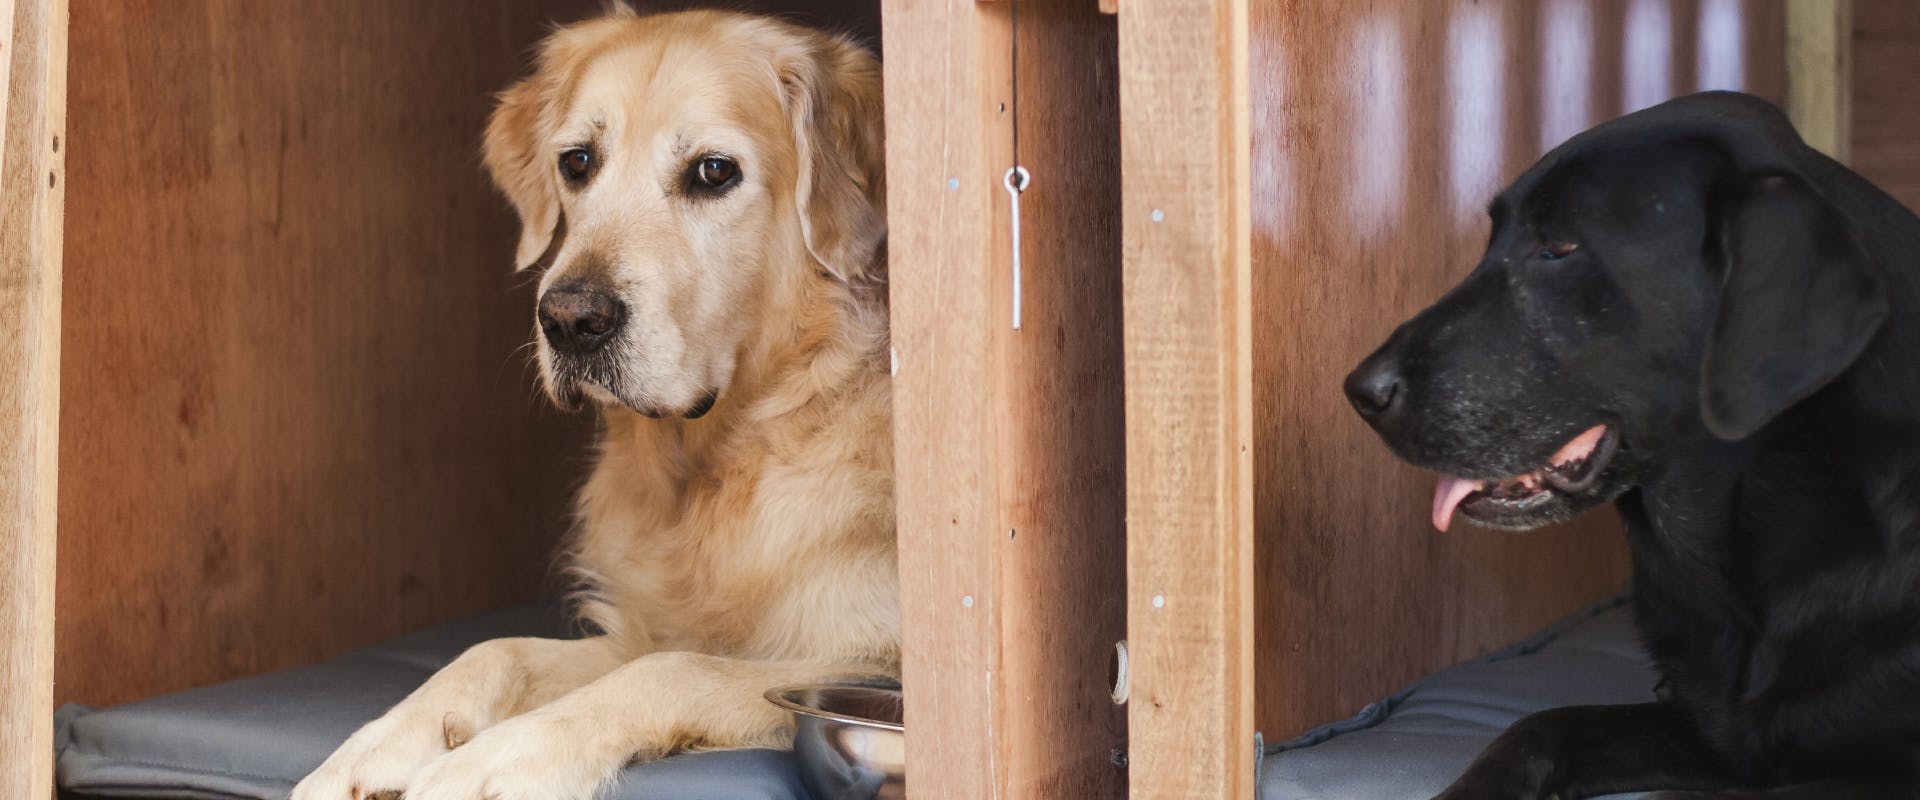 two extra large dogs inside a wooden dog crate